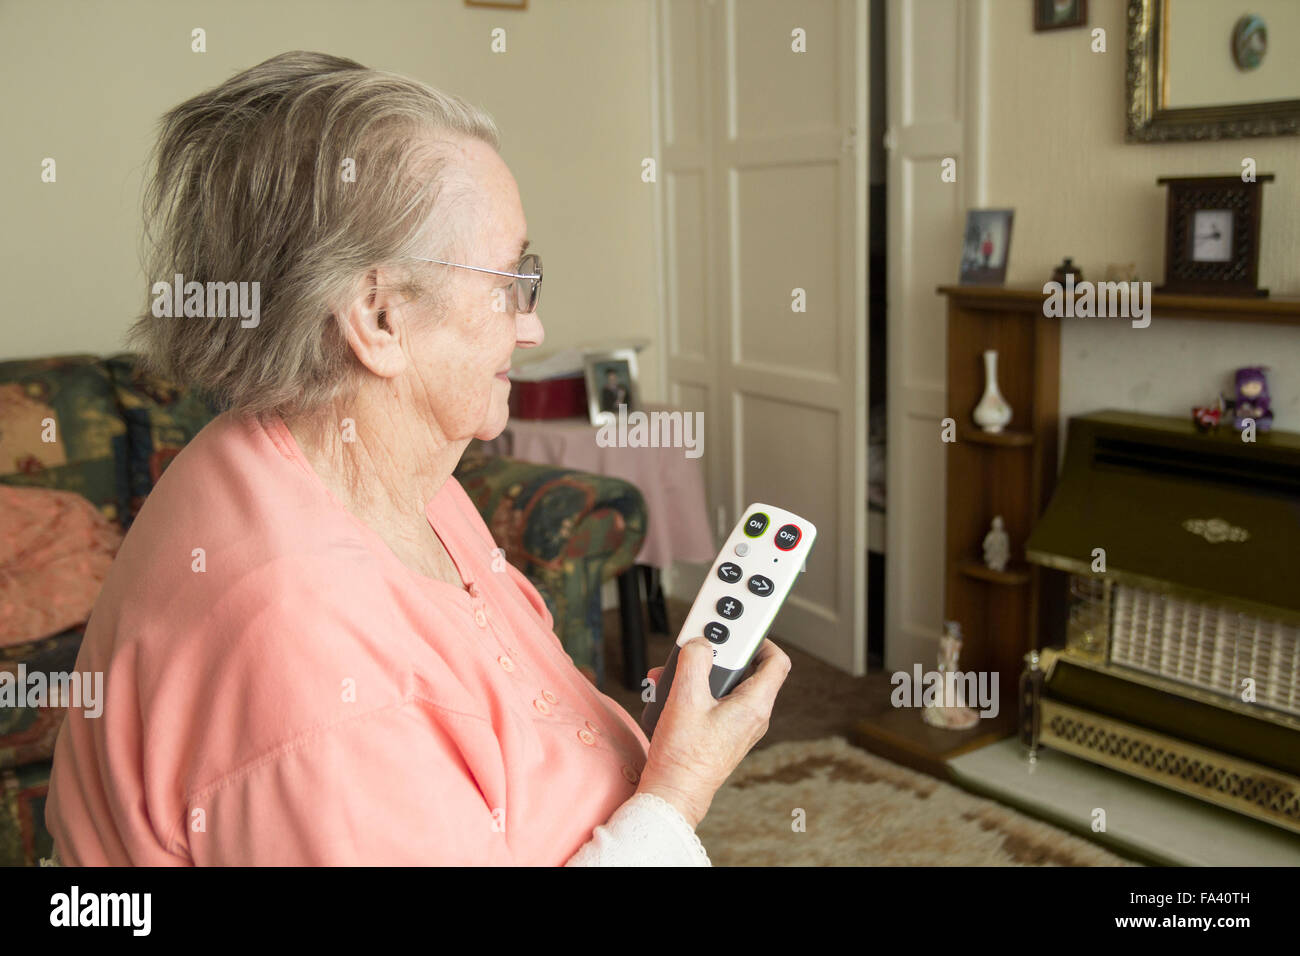 90 year old lady using large button TV remote control. Stock Photo